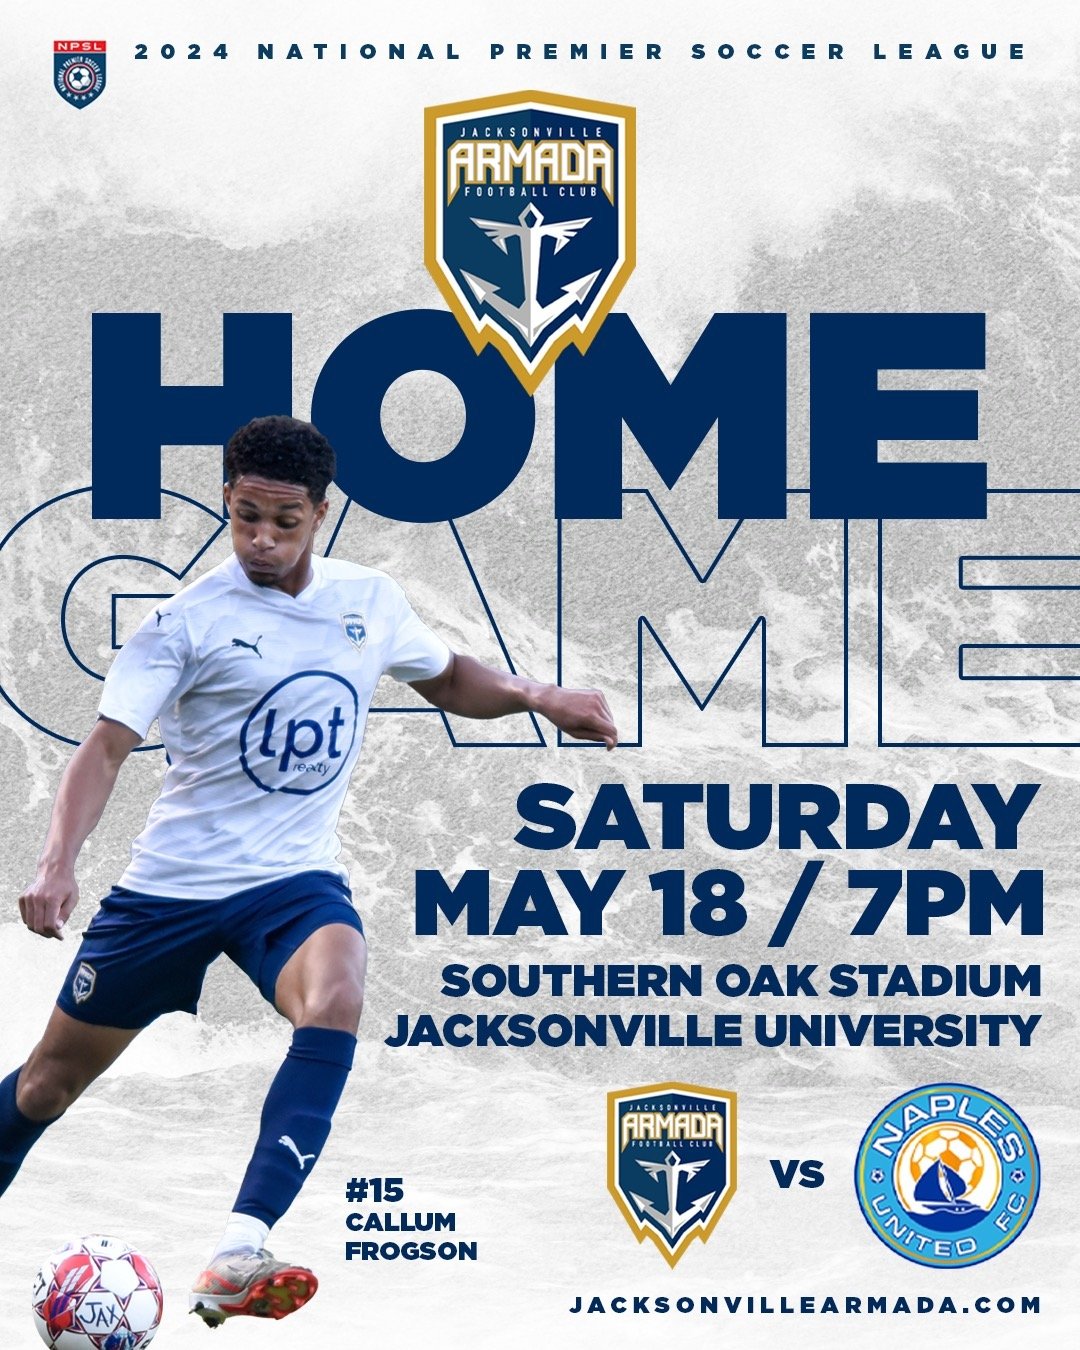 The next Armada Home Game is this Saturday, May 18th / 7pm vs Naples United FC at Southern Oak Stadium on the campus of Jacksonville University.

The link in our profile is specific to our club so lets &quot;Pack the Oak&quot; and show the Jacksonvil